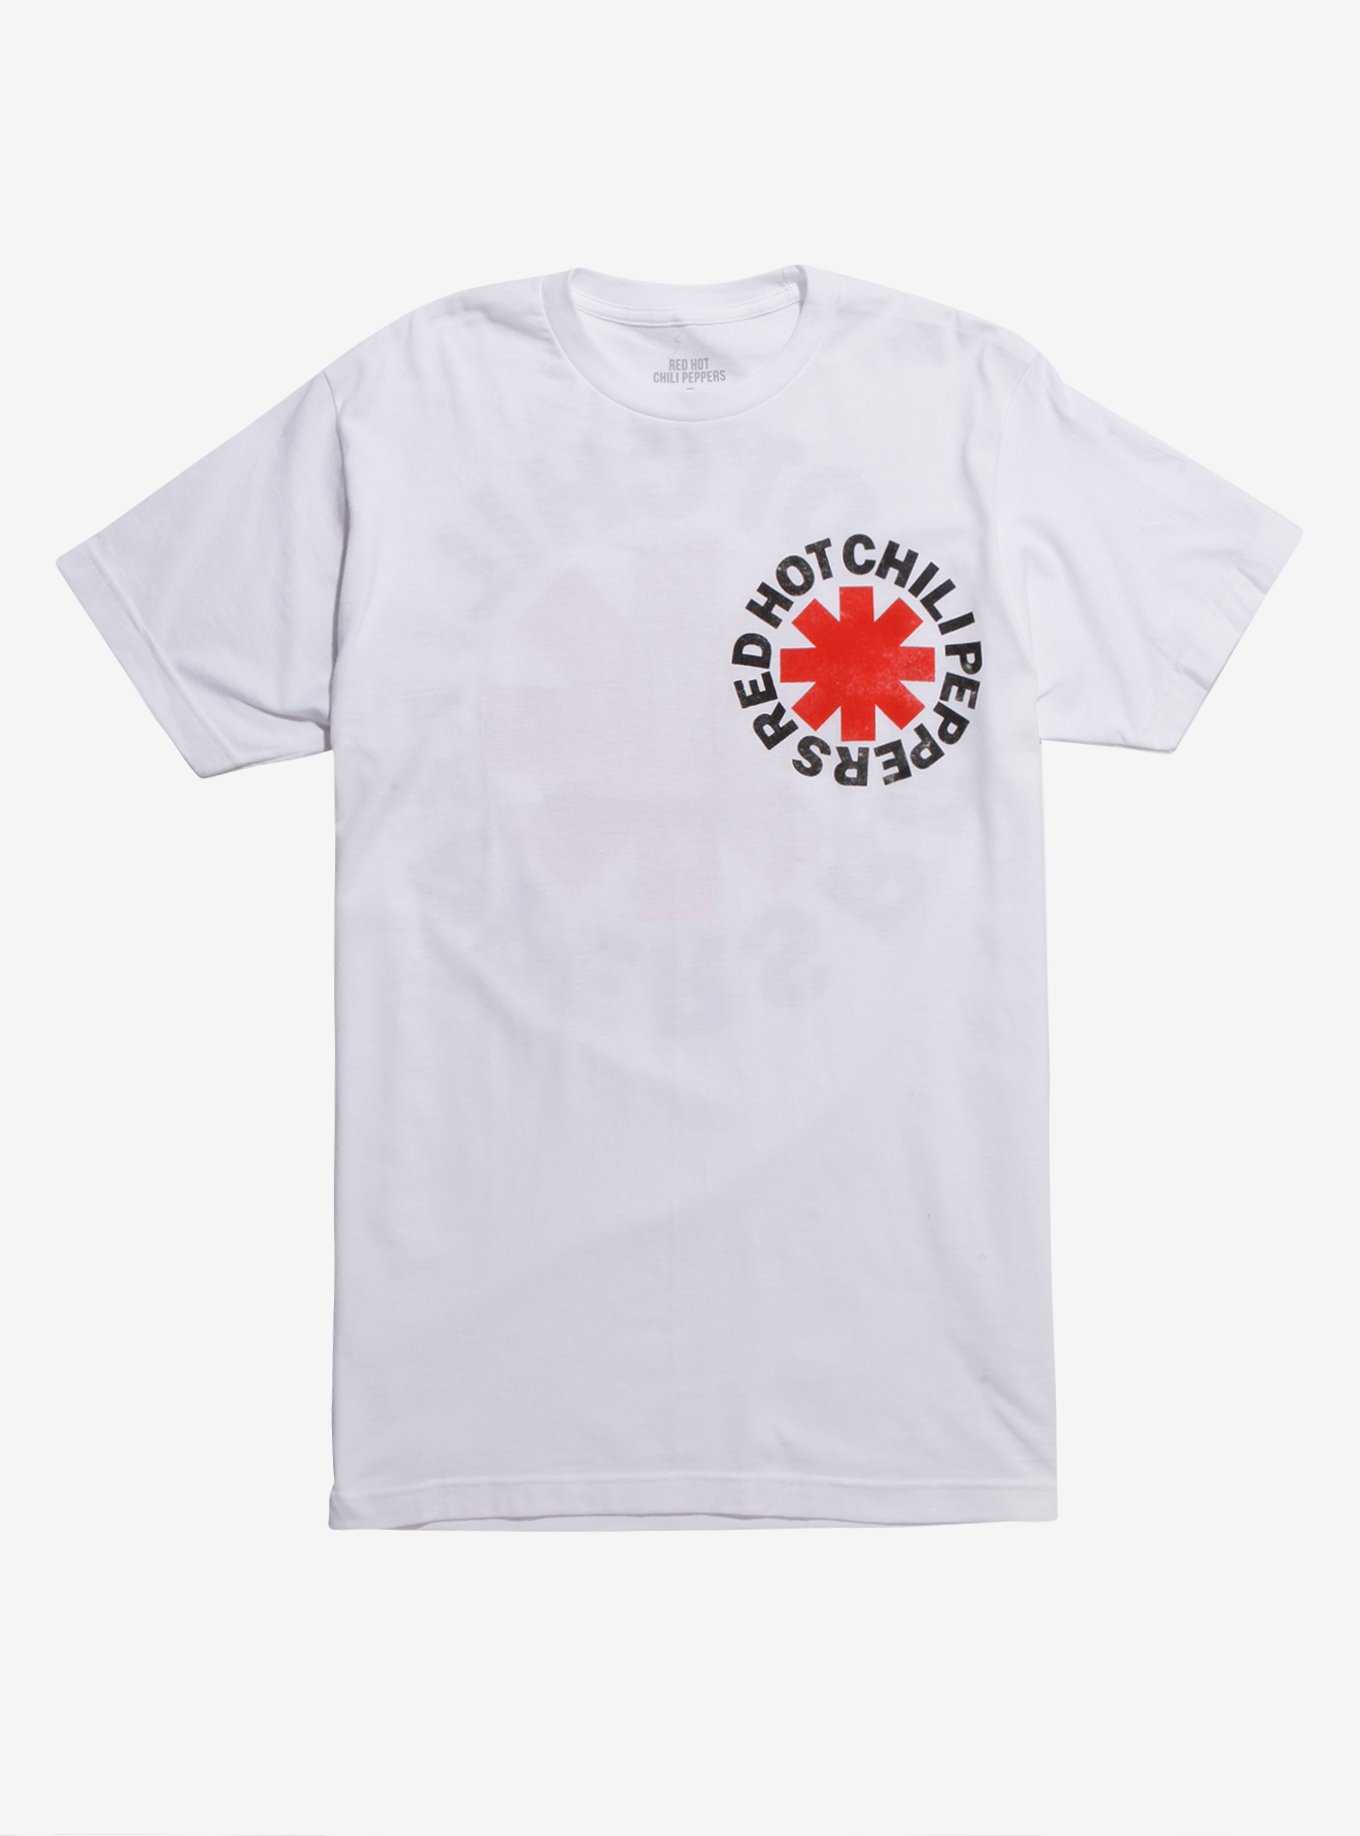 OFFICIAL Red Hot Chili Peppers T-Shirts & Merch | Hot Topic